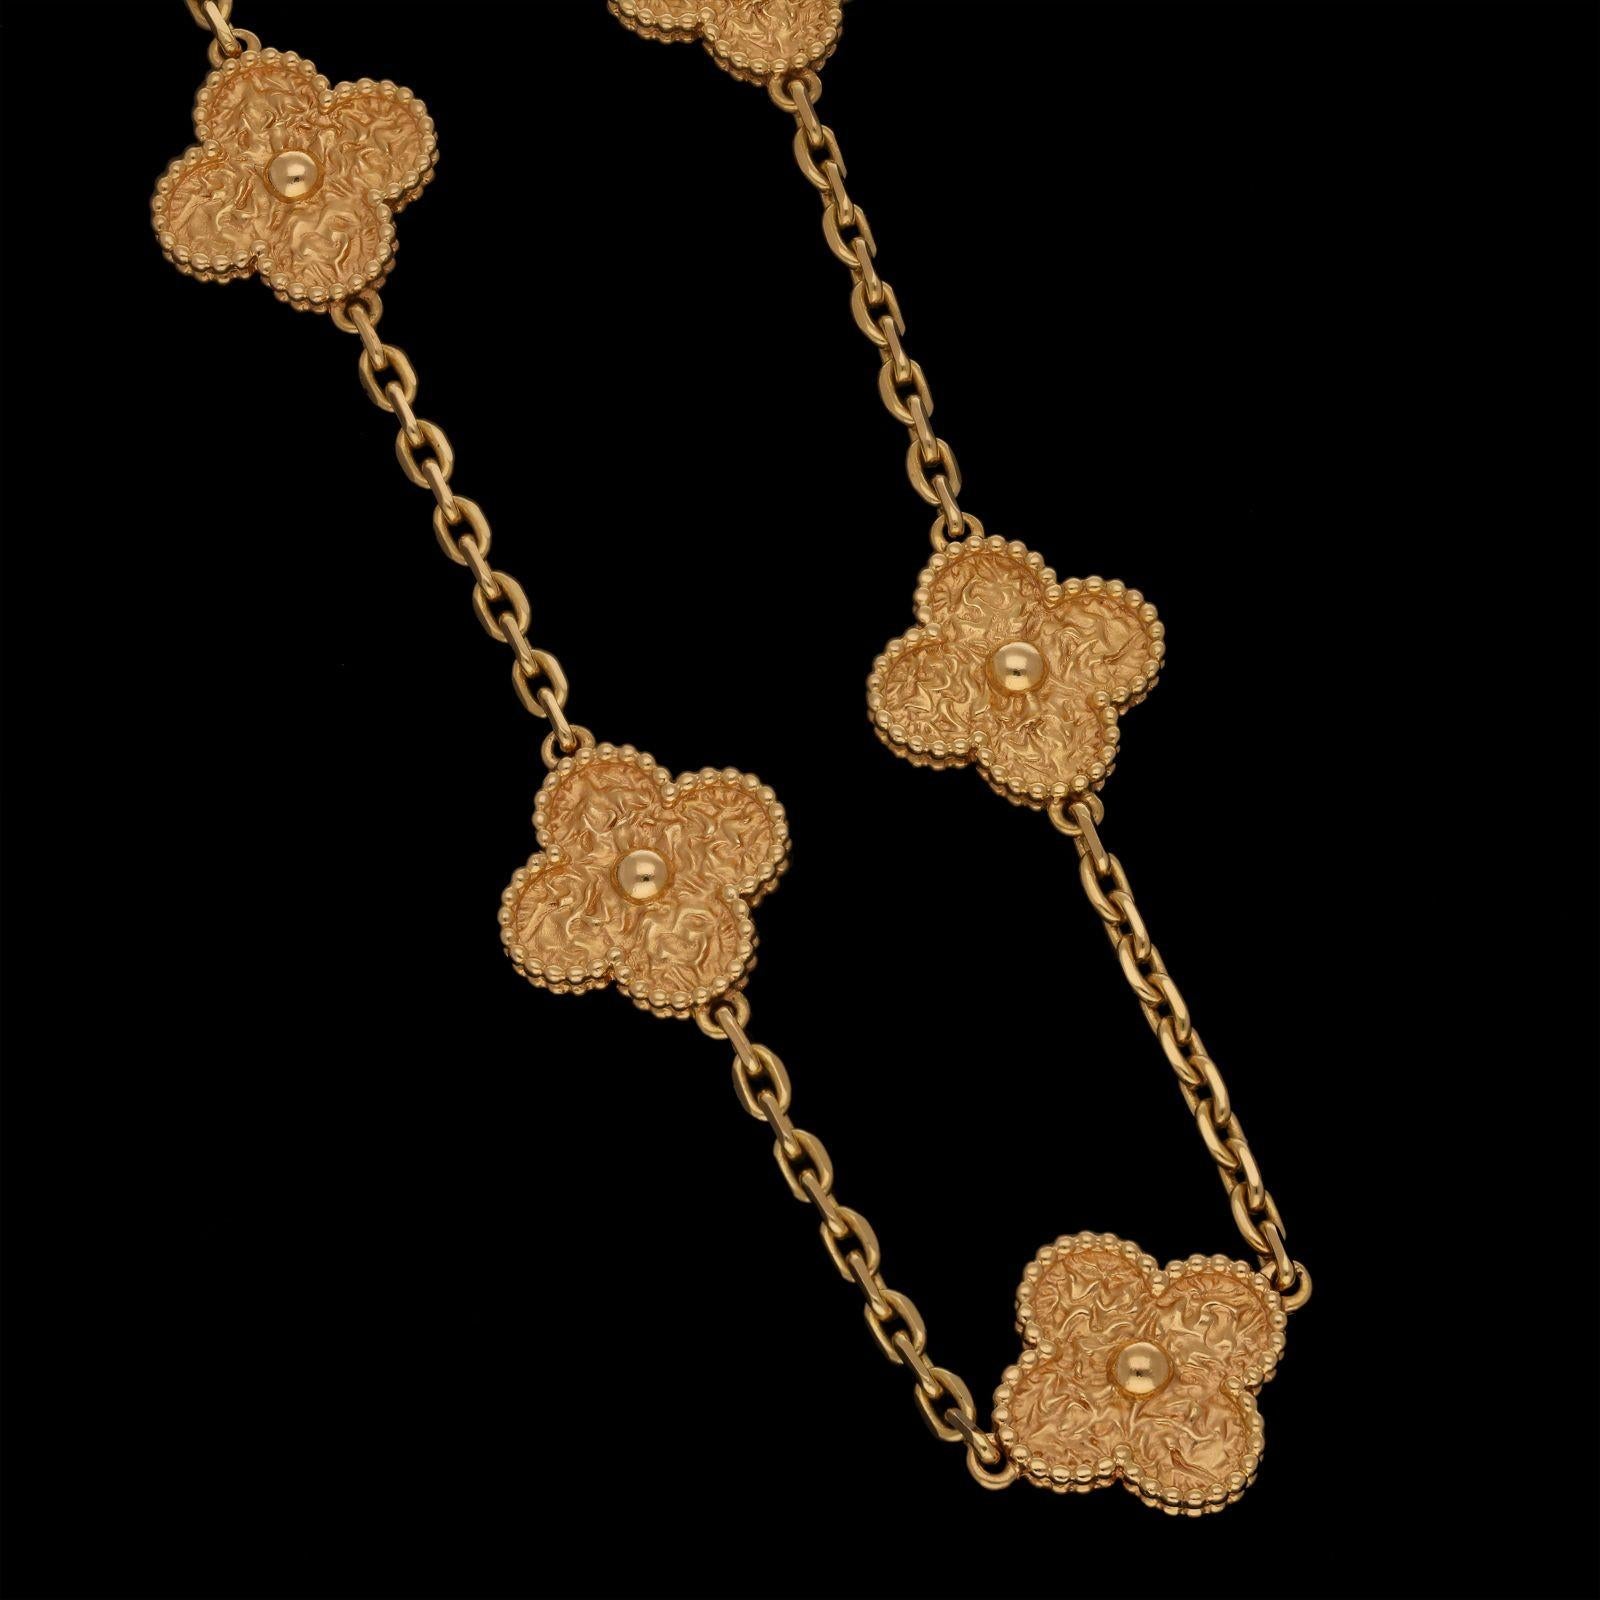 A rose gold Alhambra necklace by Van Cleef & Arpels, 2014, the 33.5” necklace features twenty textured double sided clover motifs in 18ct rose gold with a beaded border, joined by oval links with flattened edges to a lobster clasp. The Alhambra